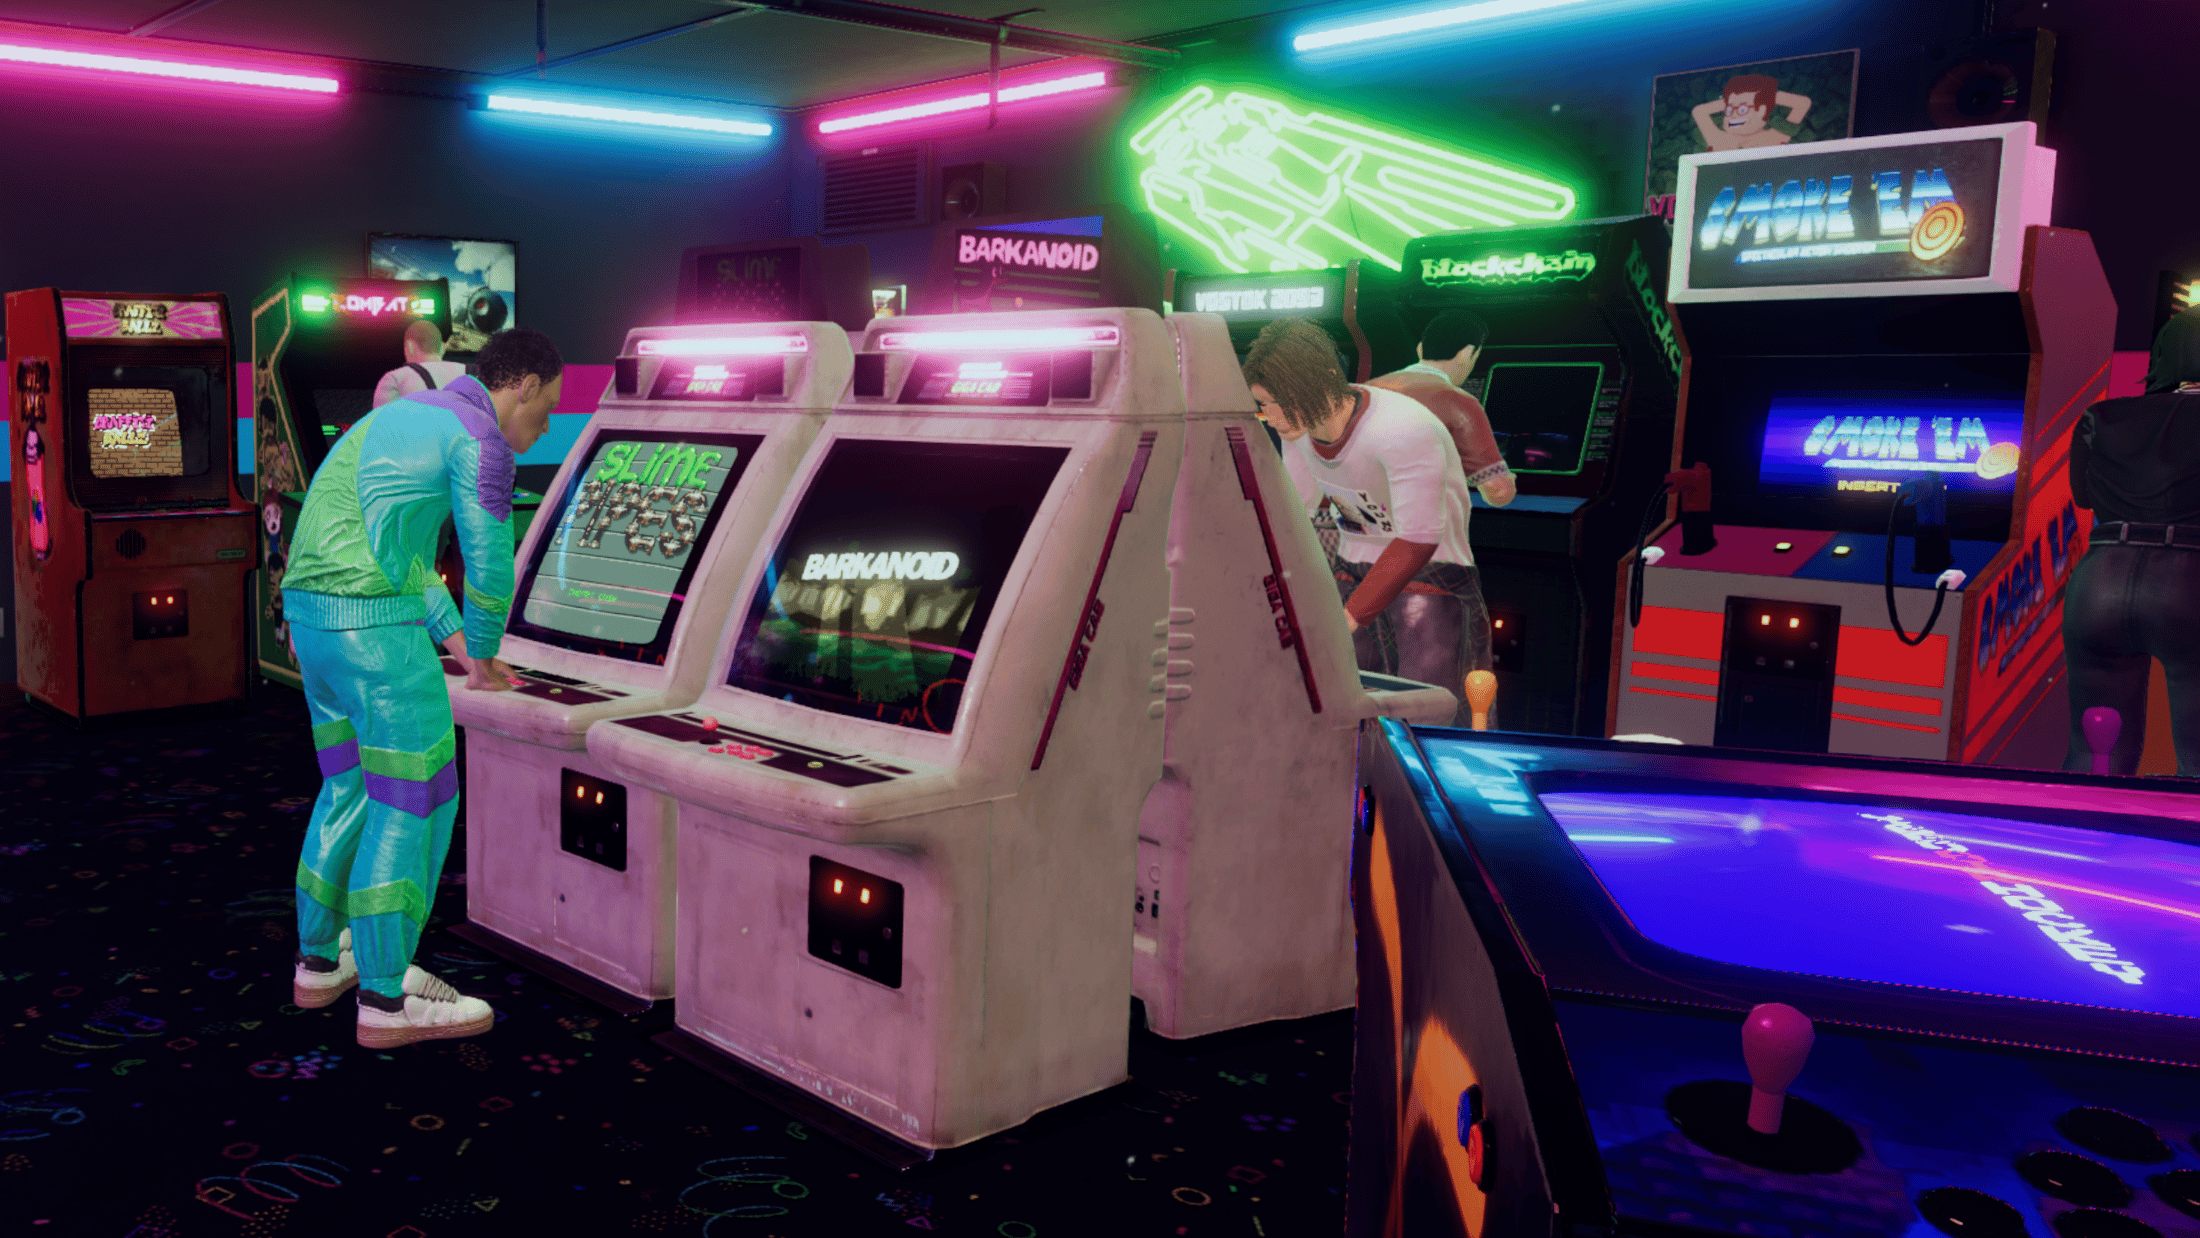 "Arcade Paradise": From the laundromat to the arcade